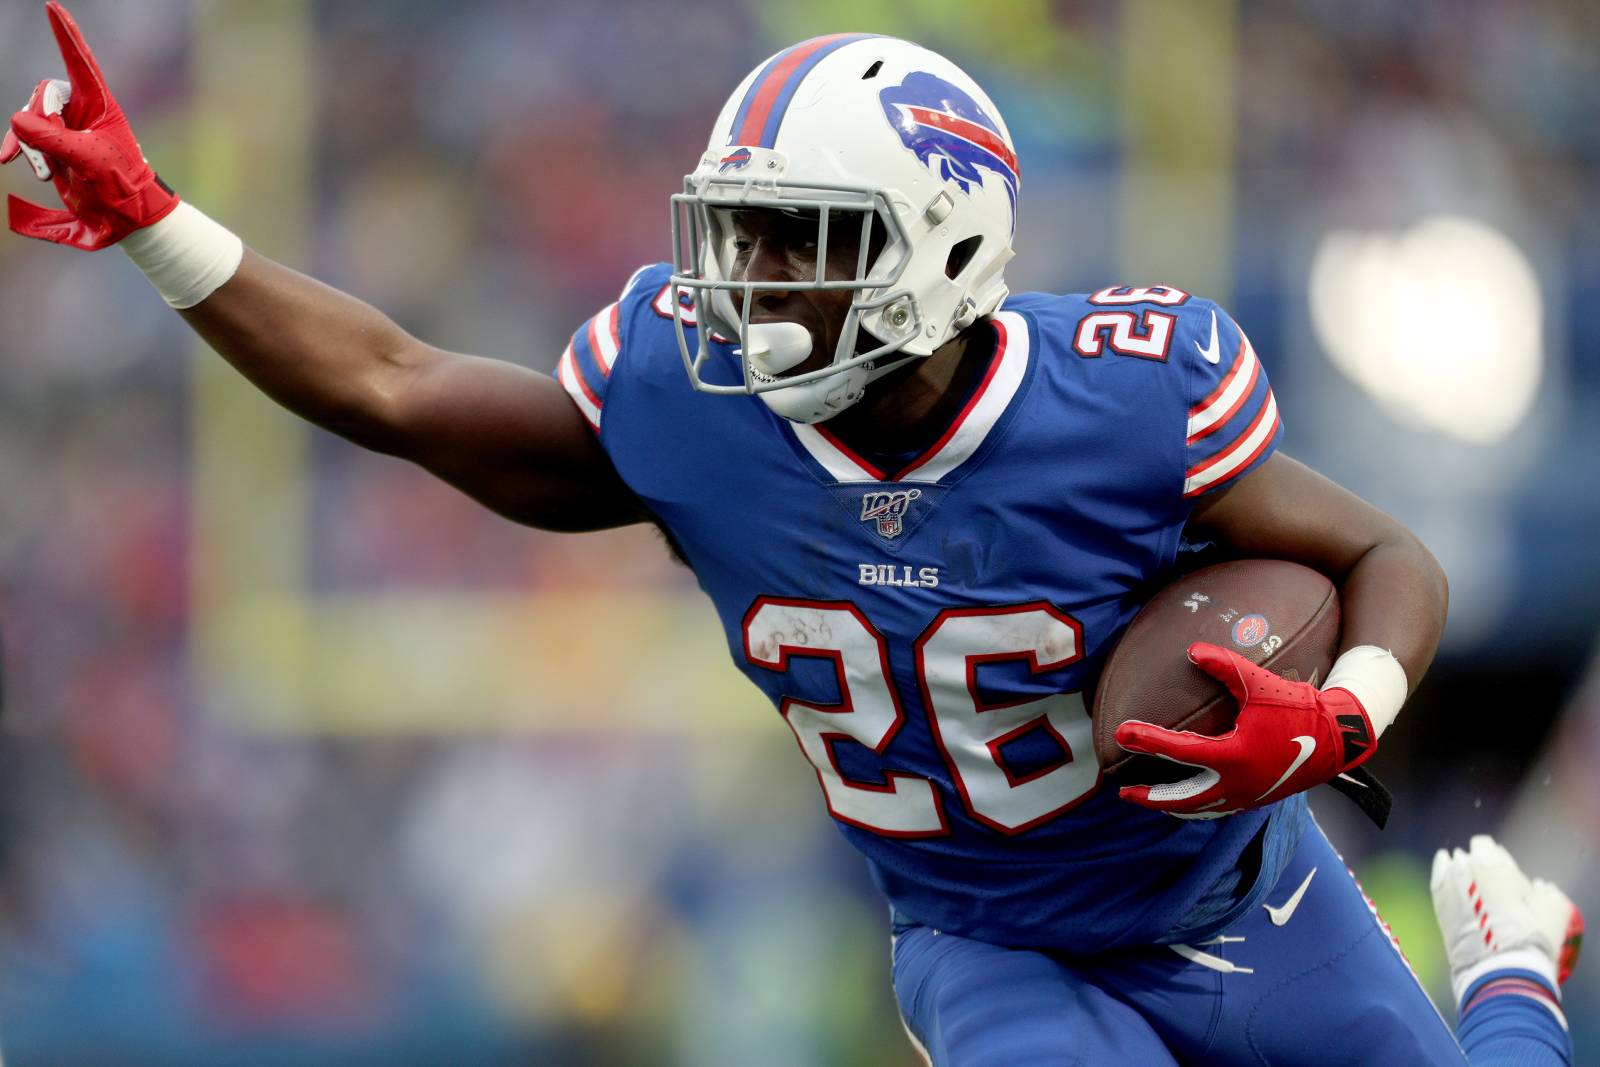 Buffalo Bills running back Devin "Motor" Singletary is an excellent RB2 choice for your fantasy football team.